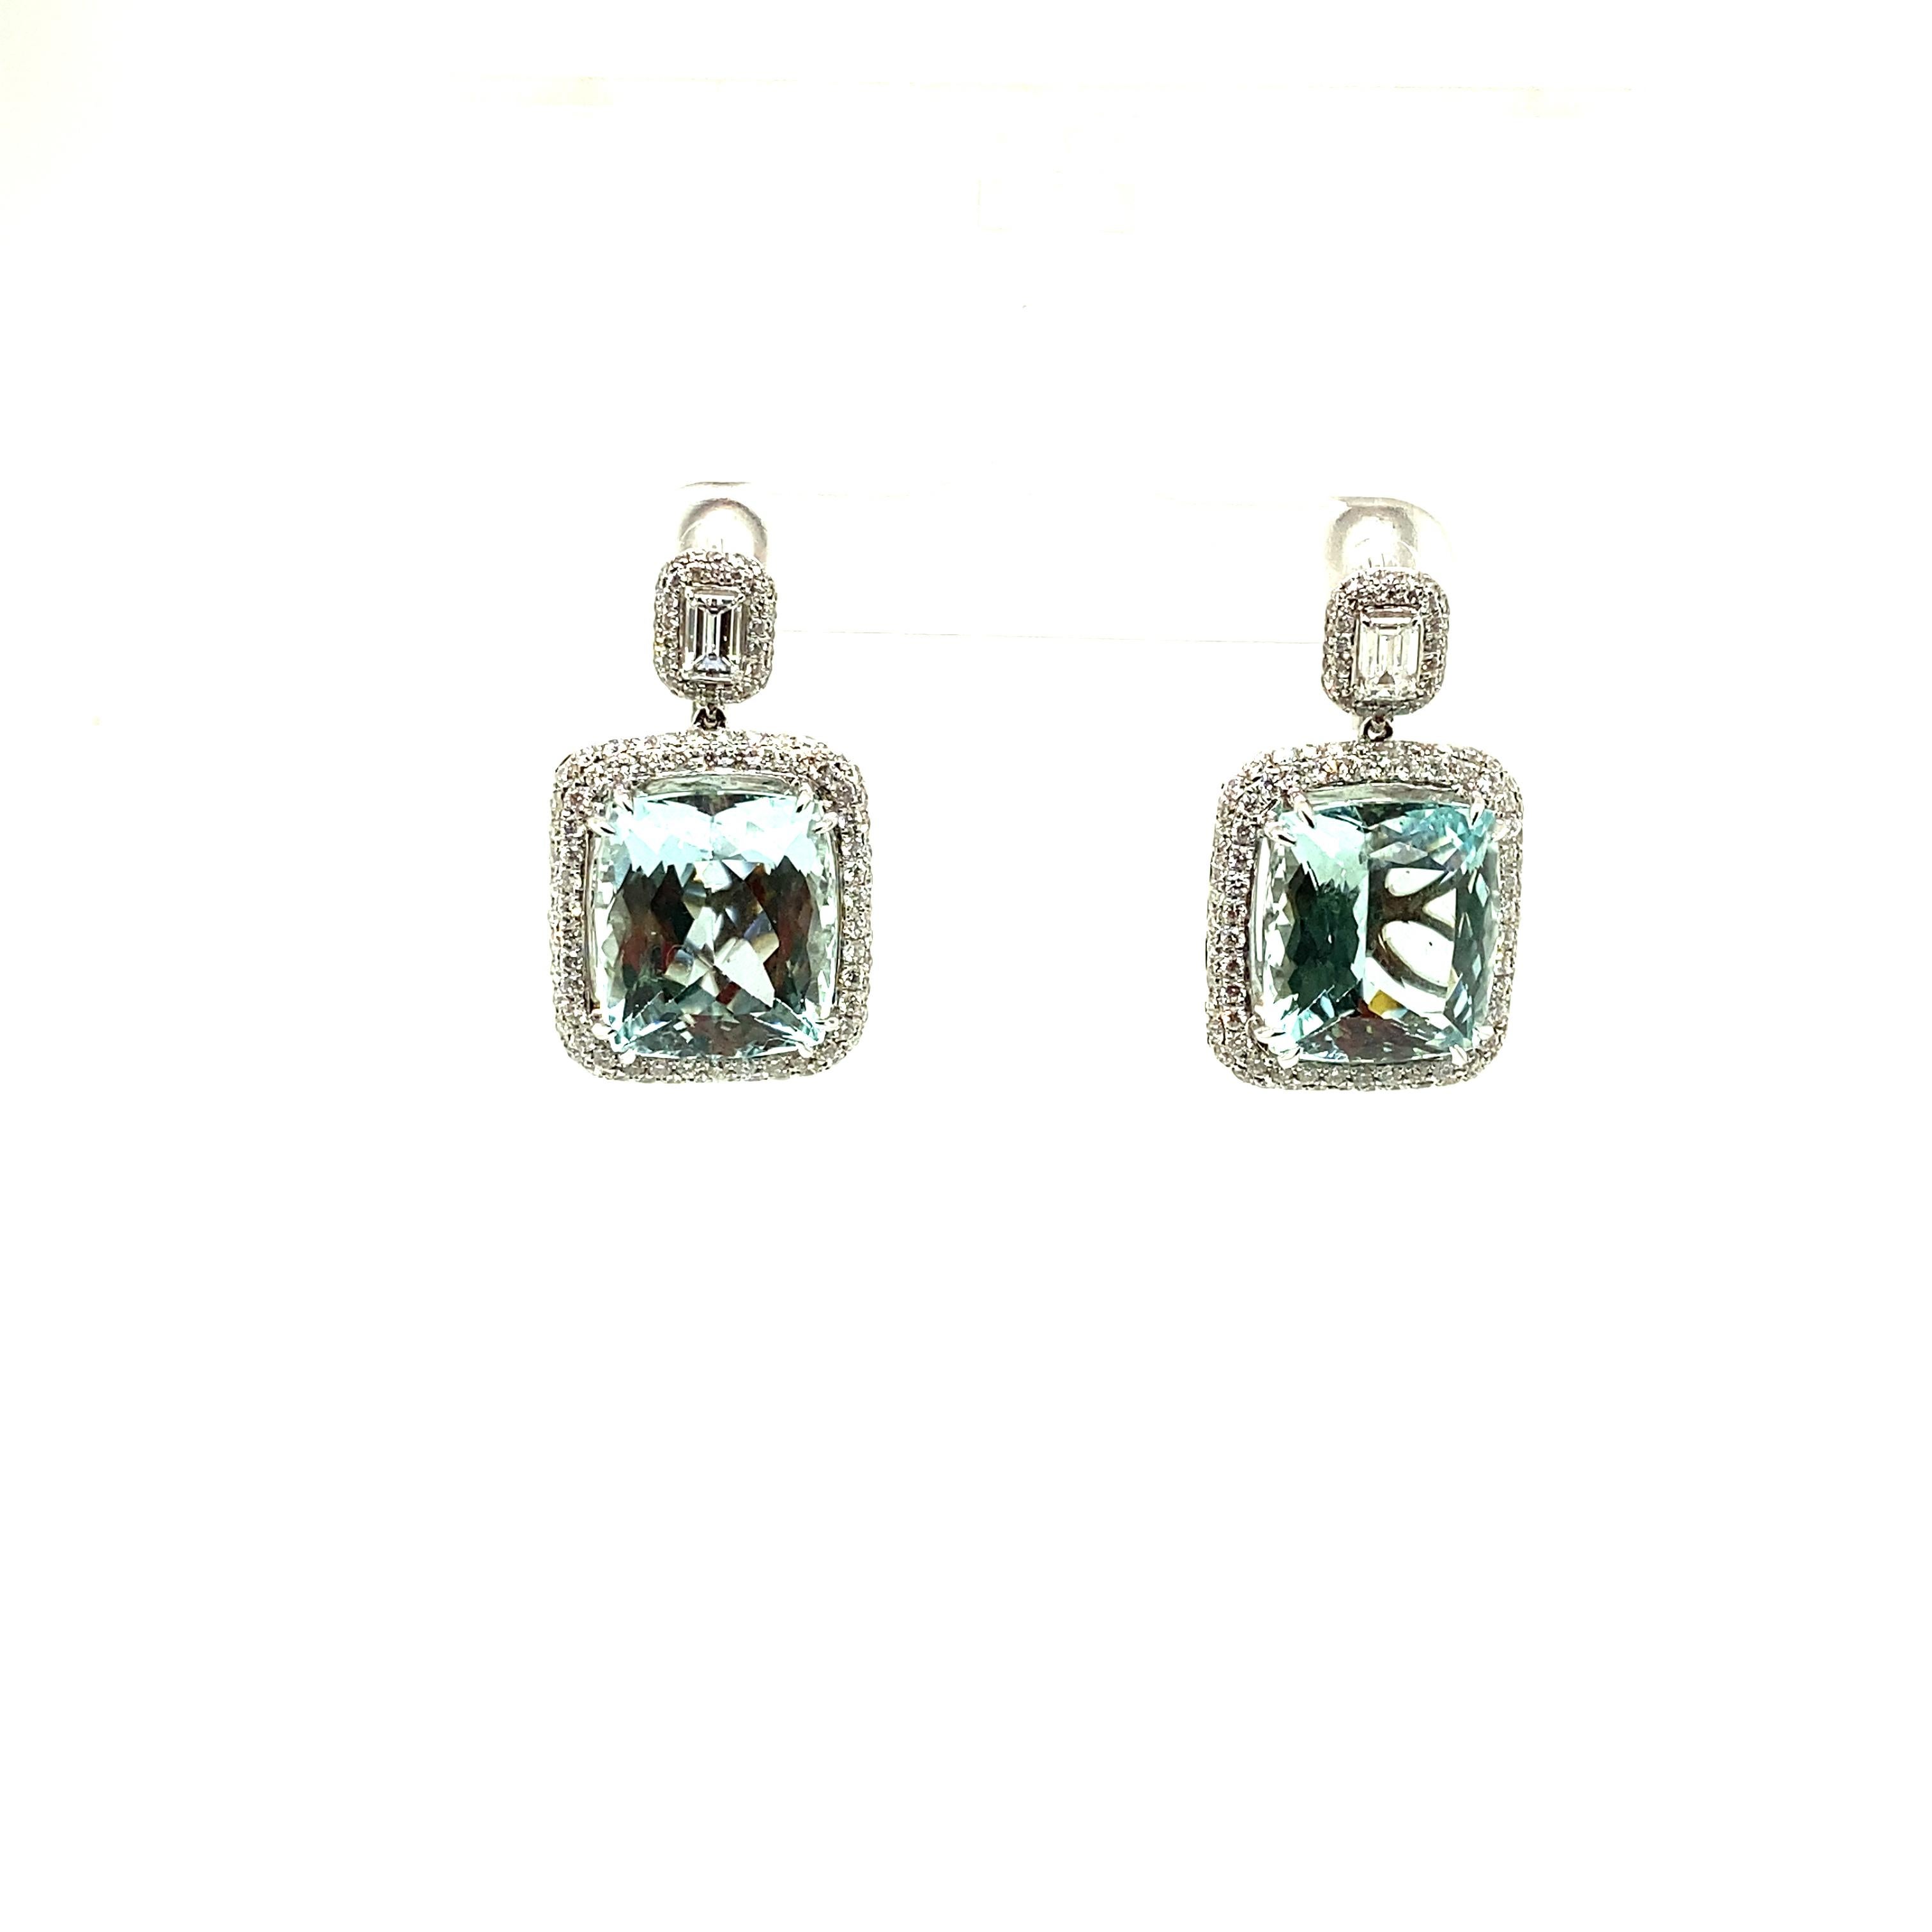 22.79 Carat Natural Cushion-Cut Aquamarine and White Diamond Gold Earrings:

A beautiful pair of earrings, it features 2 cushion-cut natural aquamarines weighing 22.79 carat surrounded and topped by white round brilliant-cut and emerald-cut diamonds